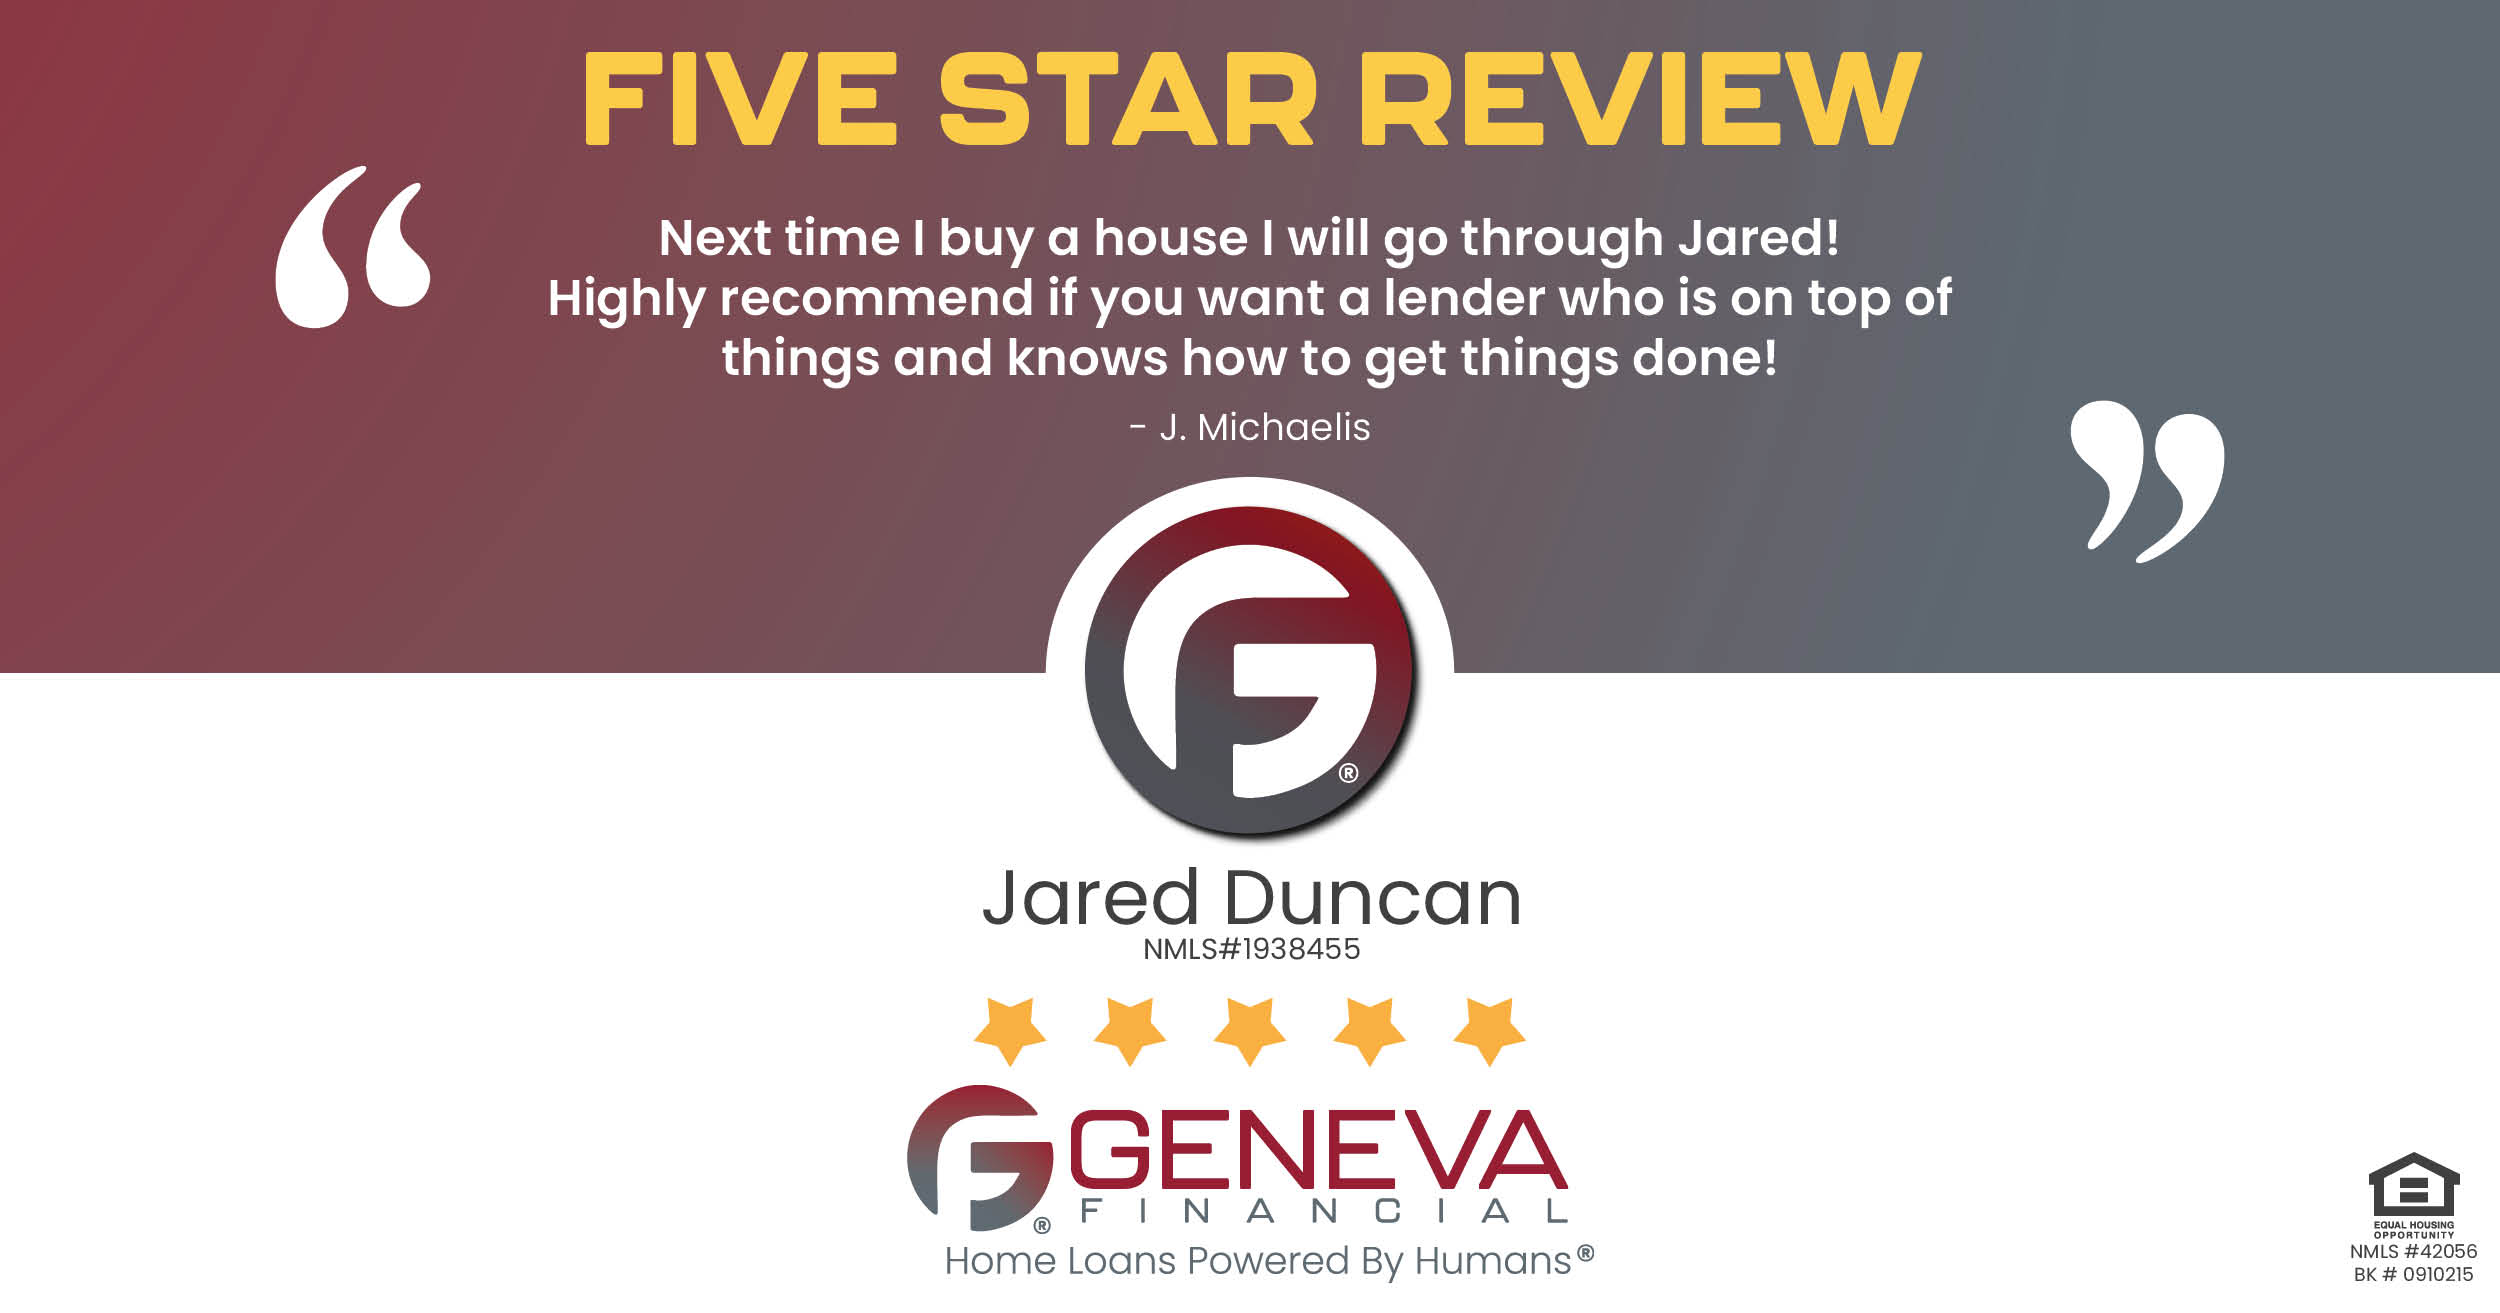 5 Star Review for Jared Duncan, Licensed Mortgage Loan Officer with Geneva Financial, Englewood, CO – Home Loans Powered by Humans®.